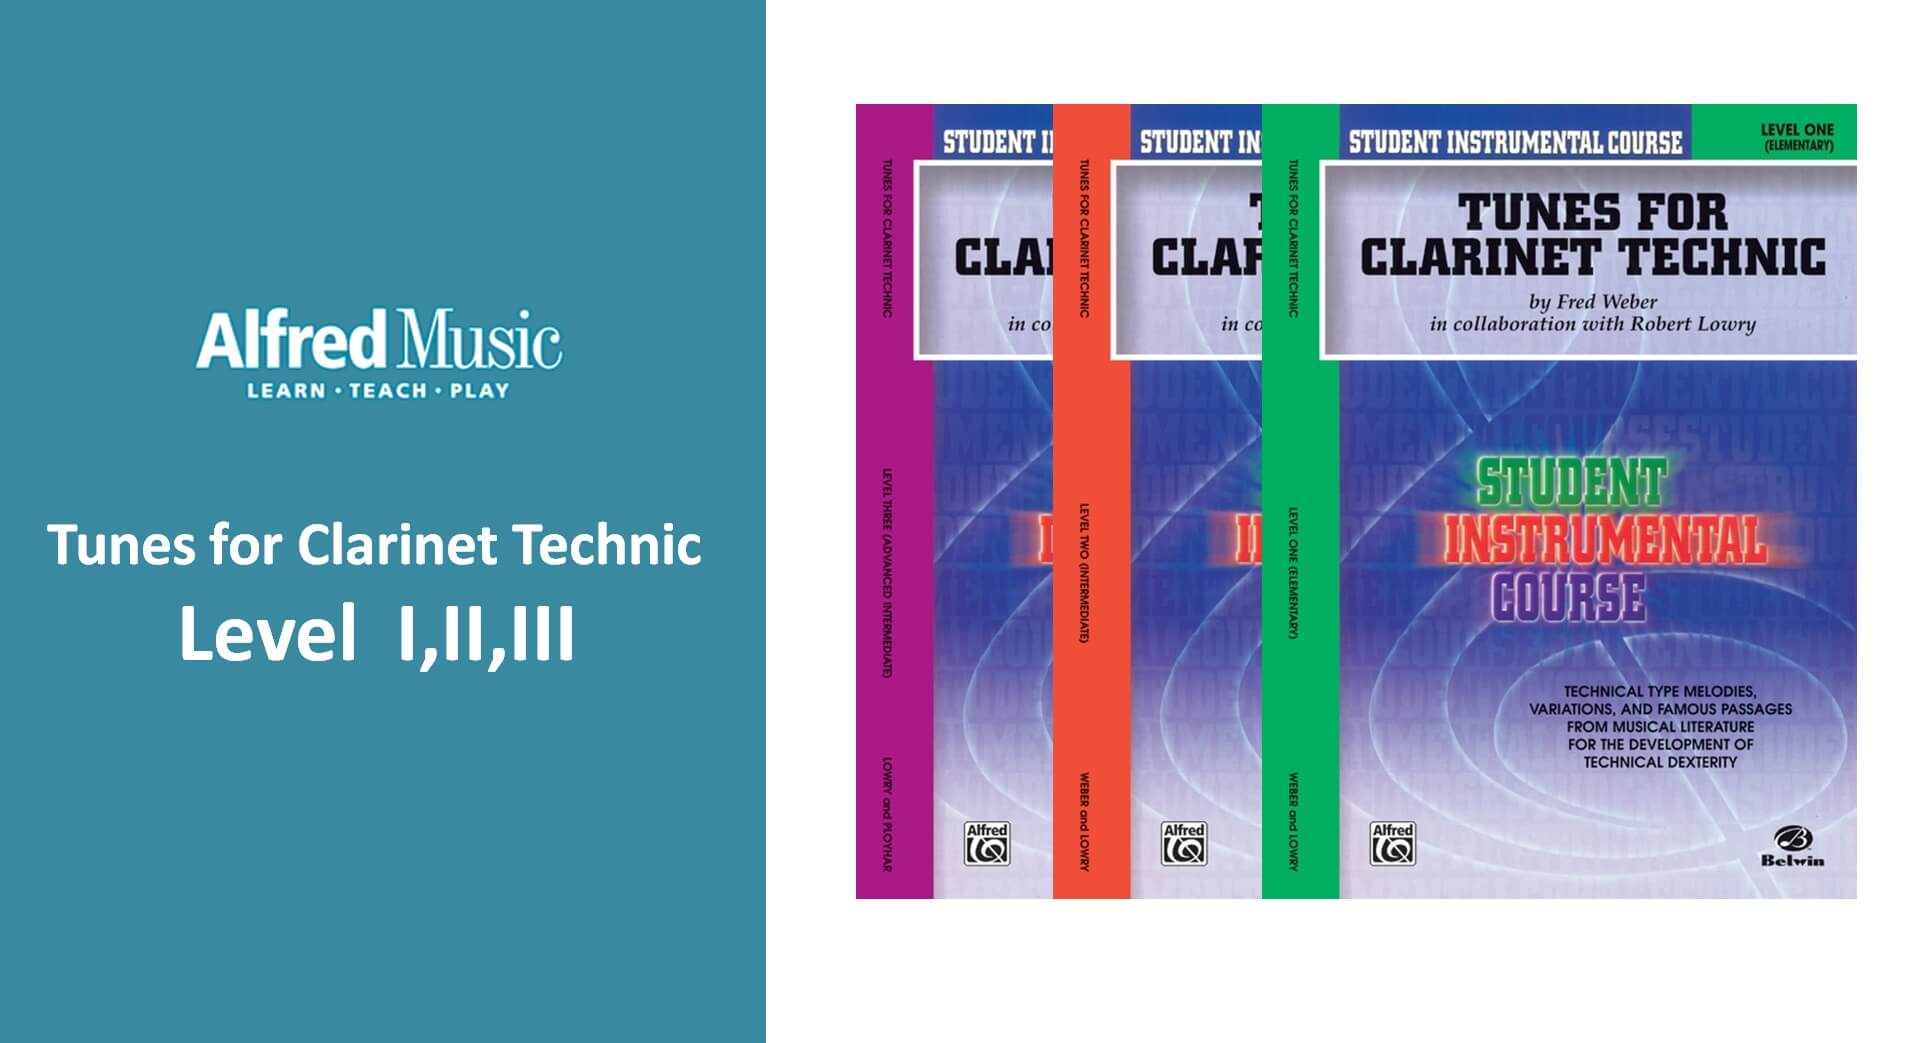 Student Instrumental Course: Tunes for Clarinet Technic